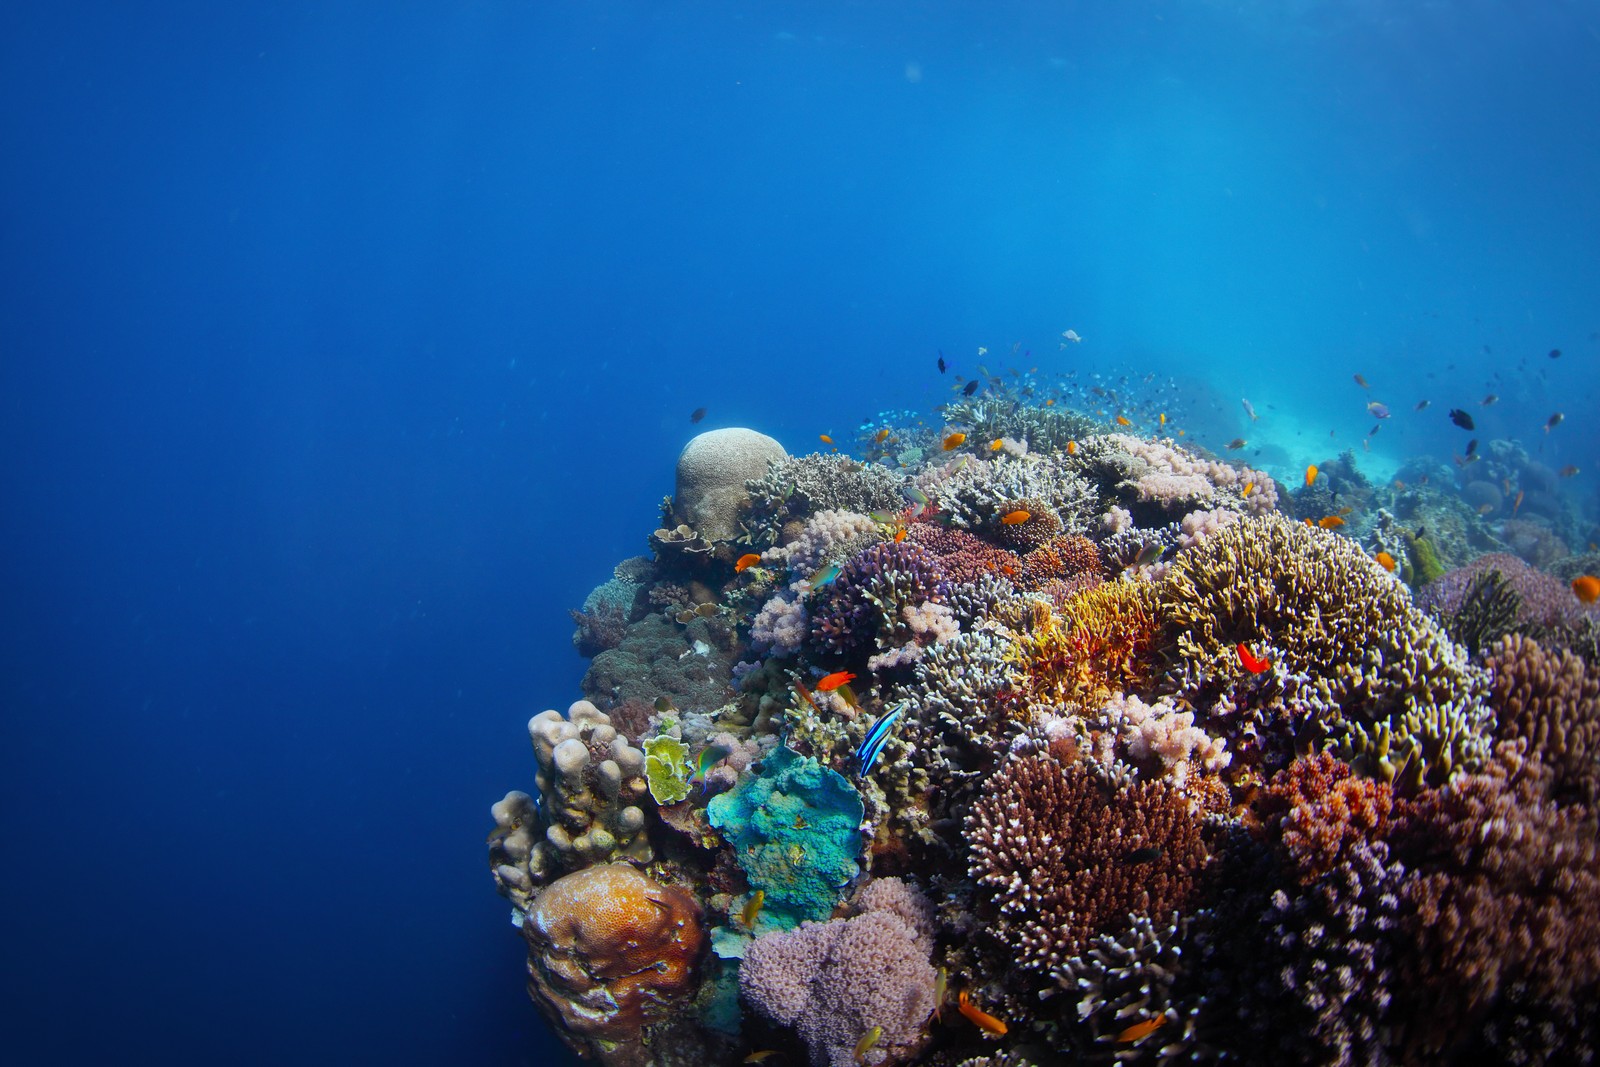 Colorful coral reefs in Balicasag Marine Sanctuary